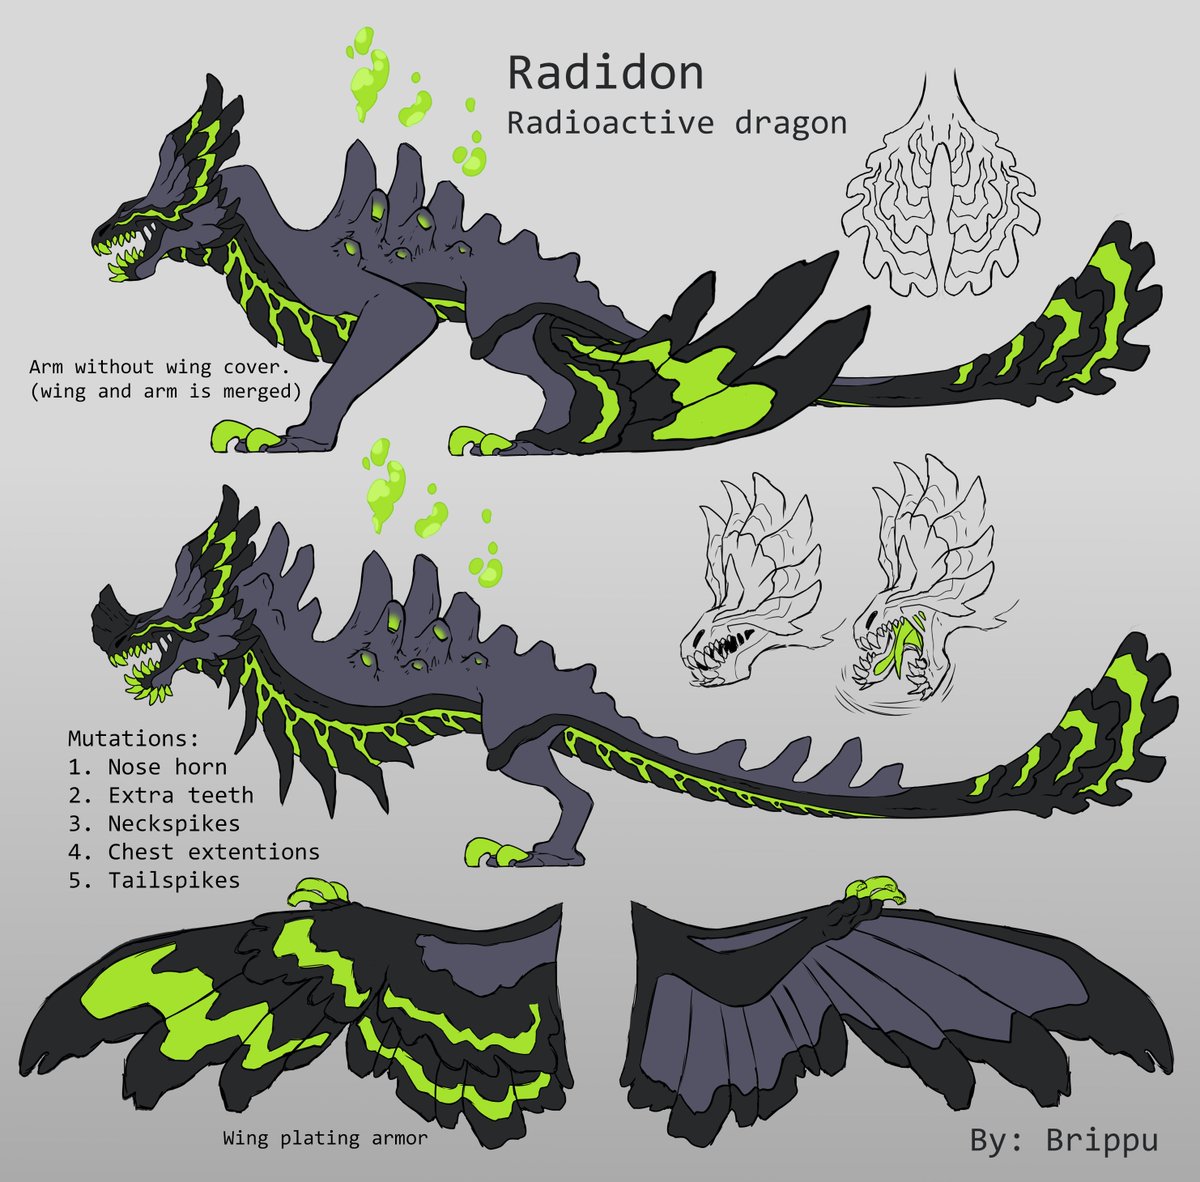 Erythia On Twitter One Word Run A Lovely Dragon We Ve Been Working On For A Huge Upcoming Update Who Doesn T Love A Radiated Toxic Boy Design For This Dragon By Brippu Roblox - roblox dragon adventures dragon types